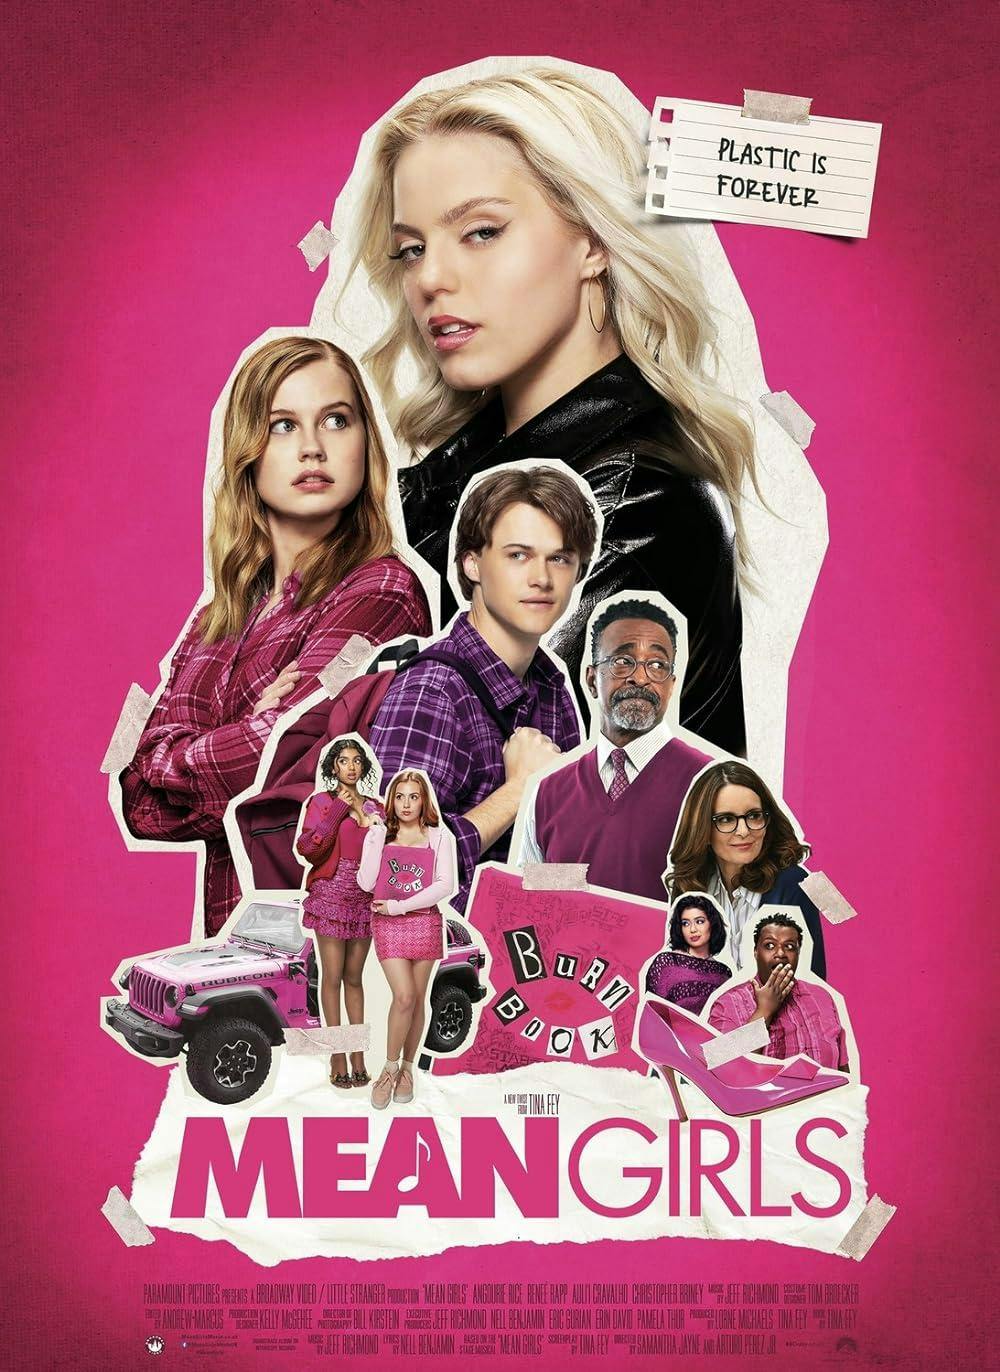 Review: 'Mean Girls' is a modern musical adaptation that makes a mark